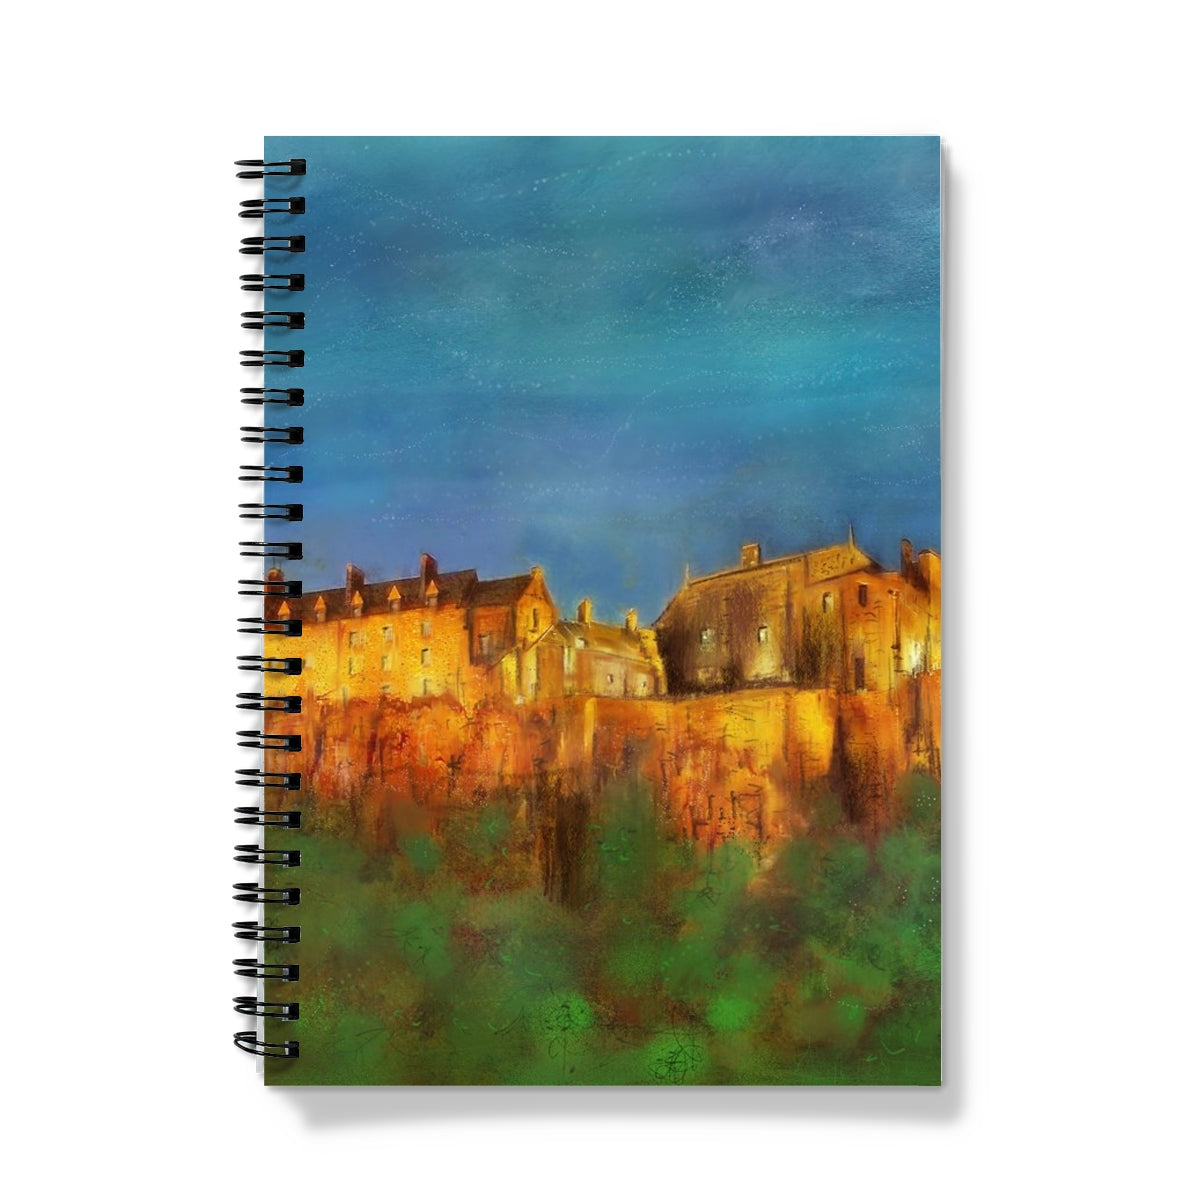 Stirling Castle Art Gifts Notebook-Journals & Notebooks-Historic & Iconic Scotland Art Gallery-A4-Lined-Paintings, Prints, Homeware, Art Gifts From Scotland By Scottish Artist Kevin Hunter